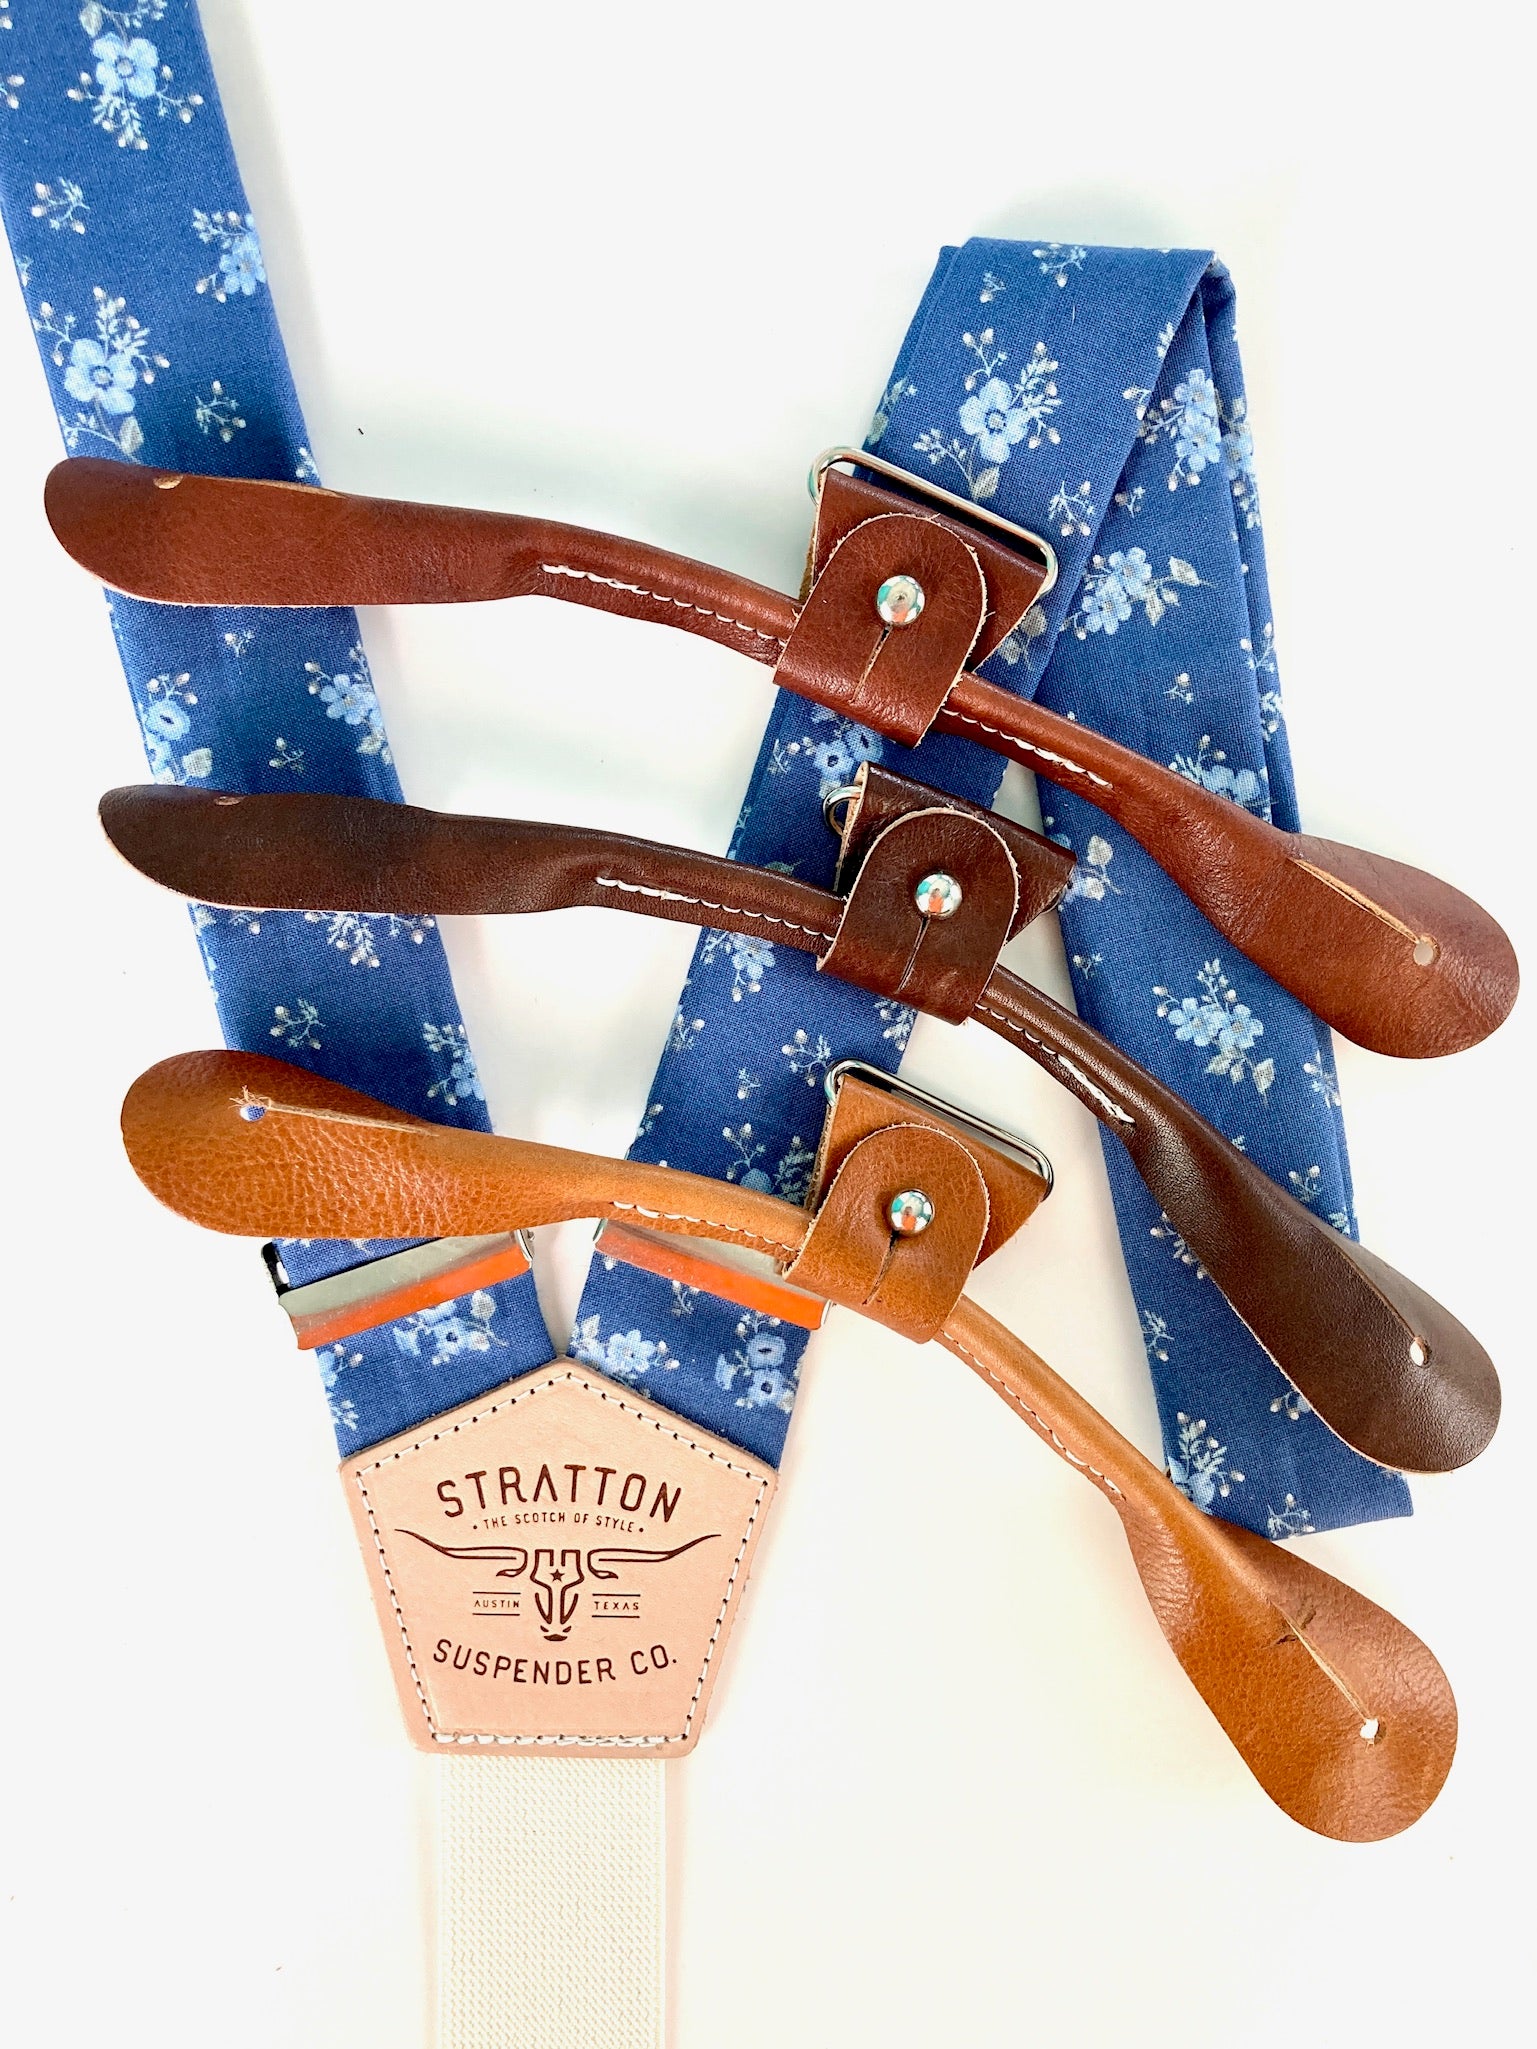 Stratton Suspender Co. Button On Set in Blue Vintage 1880 featuring Tan, Cognac, and Chocolate Leather